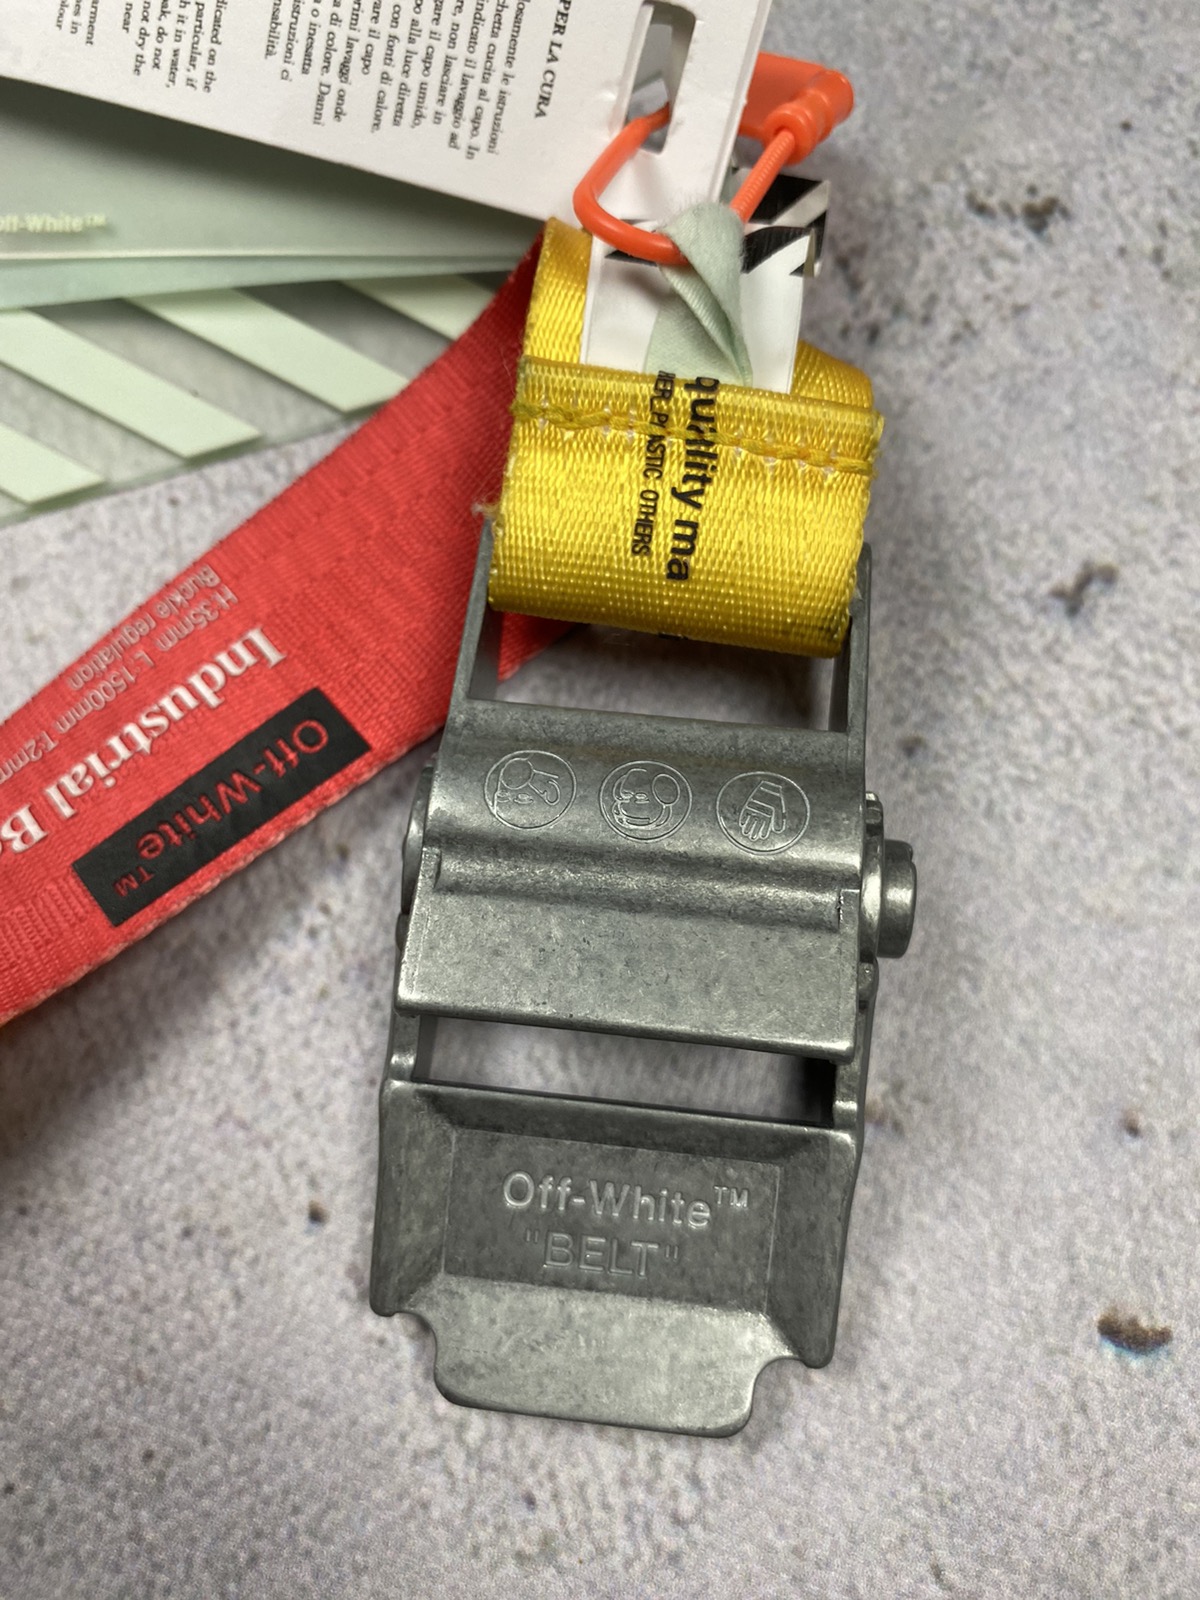 Off White industrial belt 2.0 belt red yellow - 4